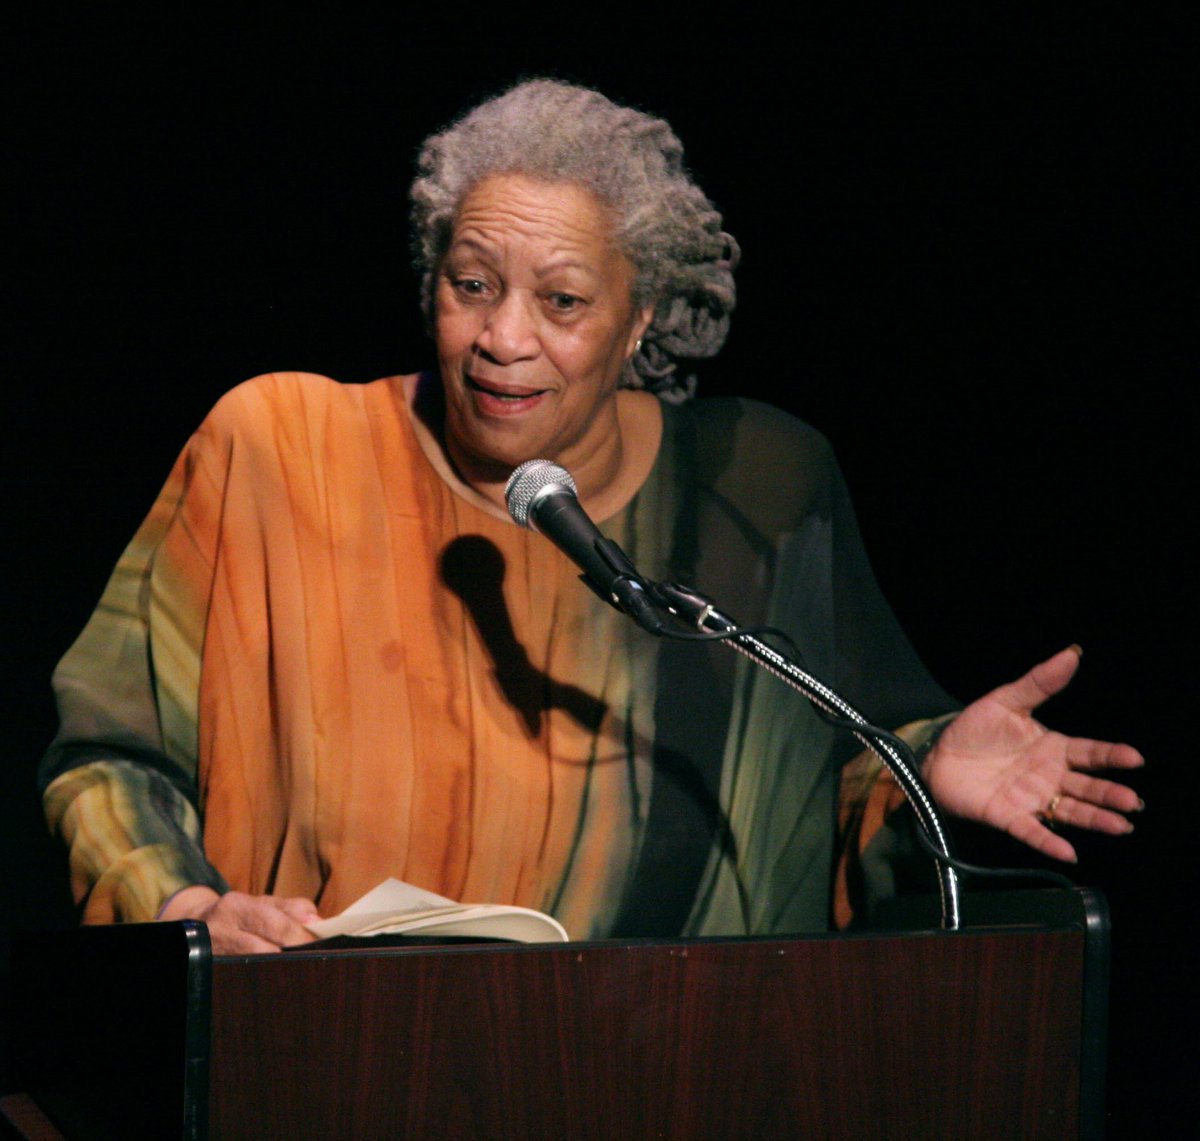 "There is no time for despair, no place for self-pity, no need for silence, no room for fear. We speak, we write, we do language. That is how civilizations heal."     ~ Toni Morrison